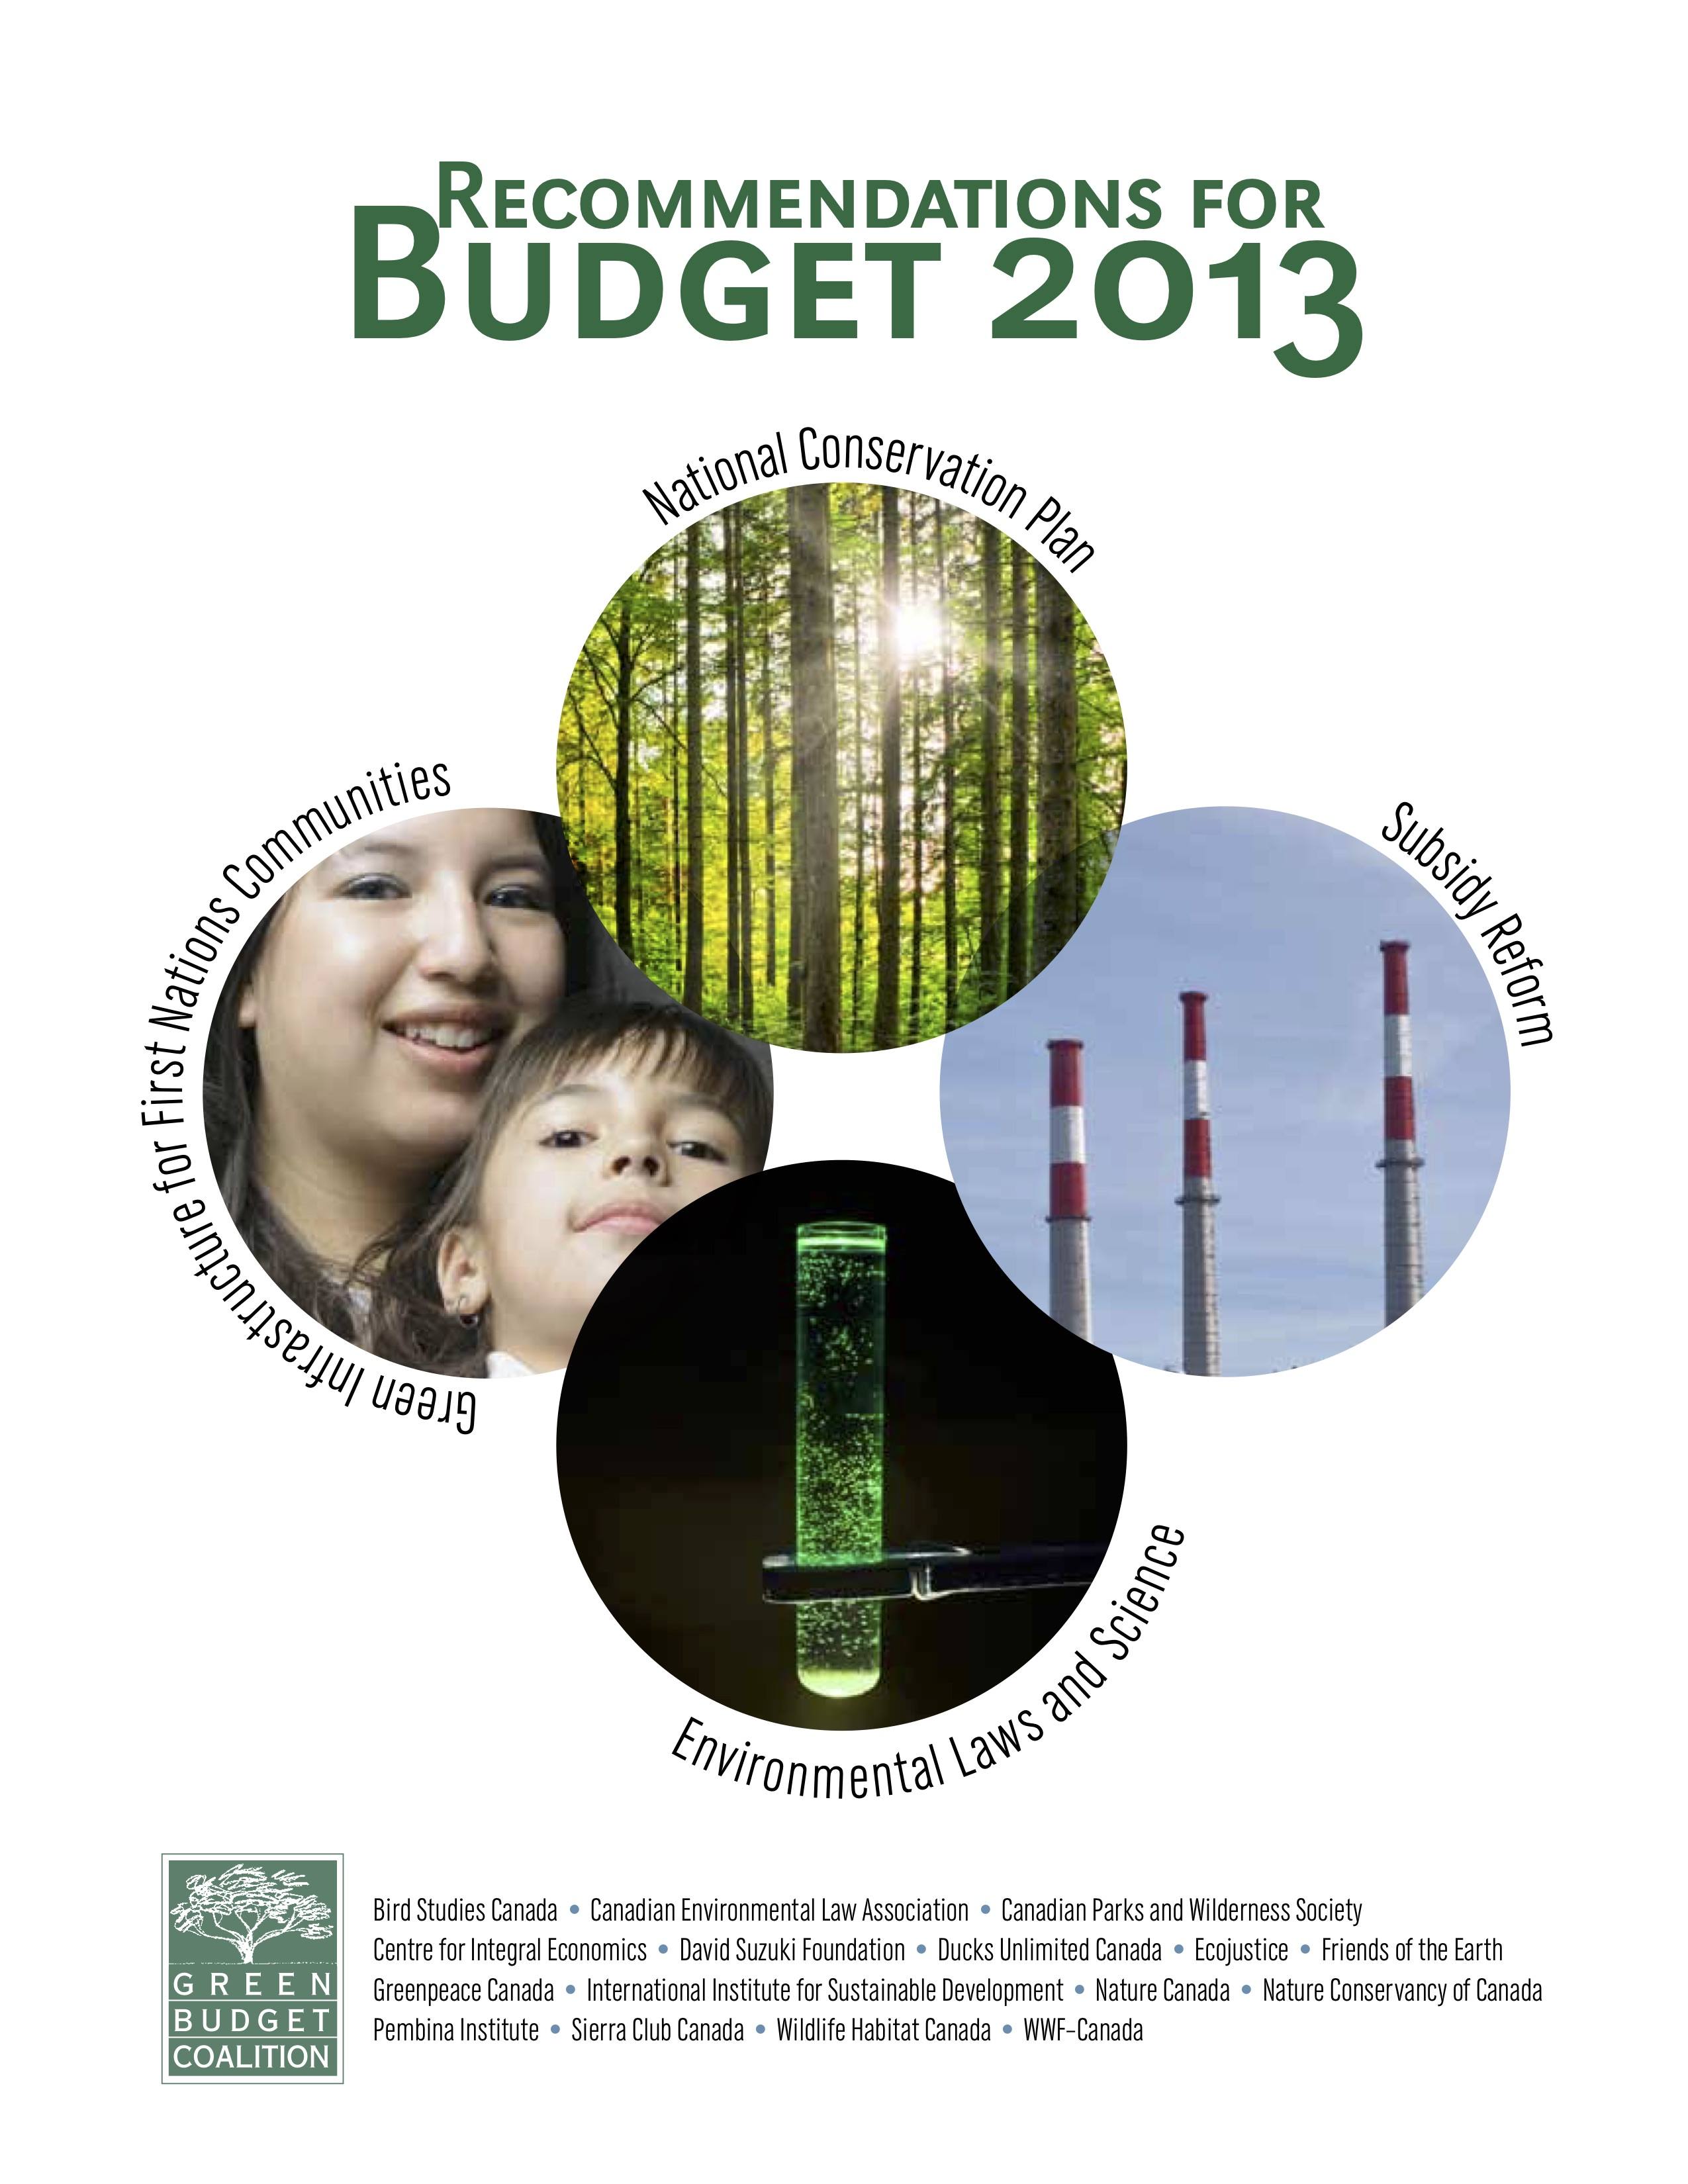 Green Budget Coalition: Recommendations for Budget 2013